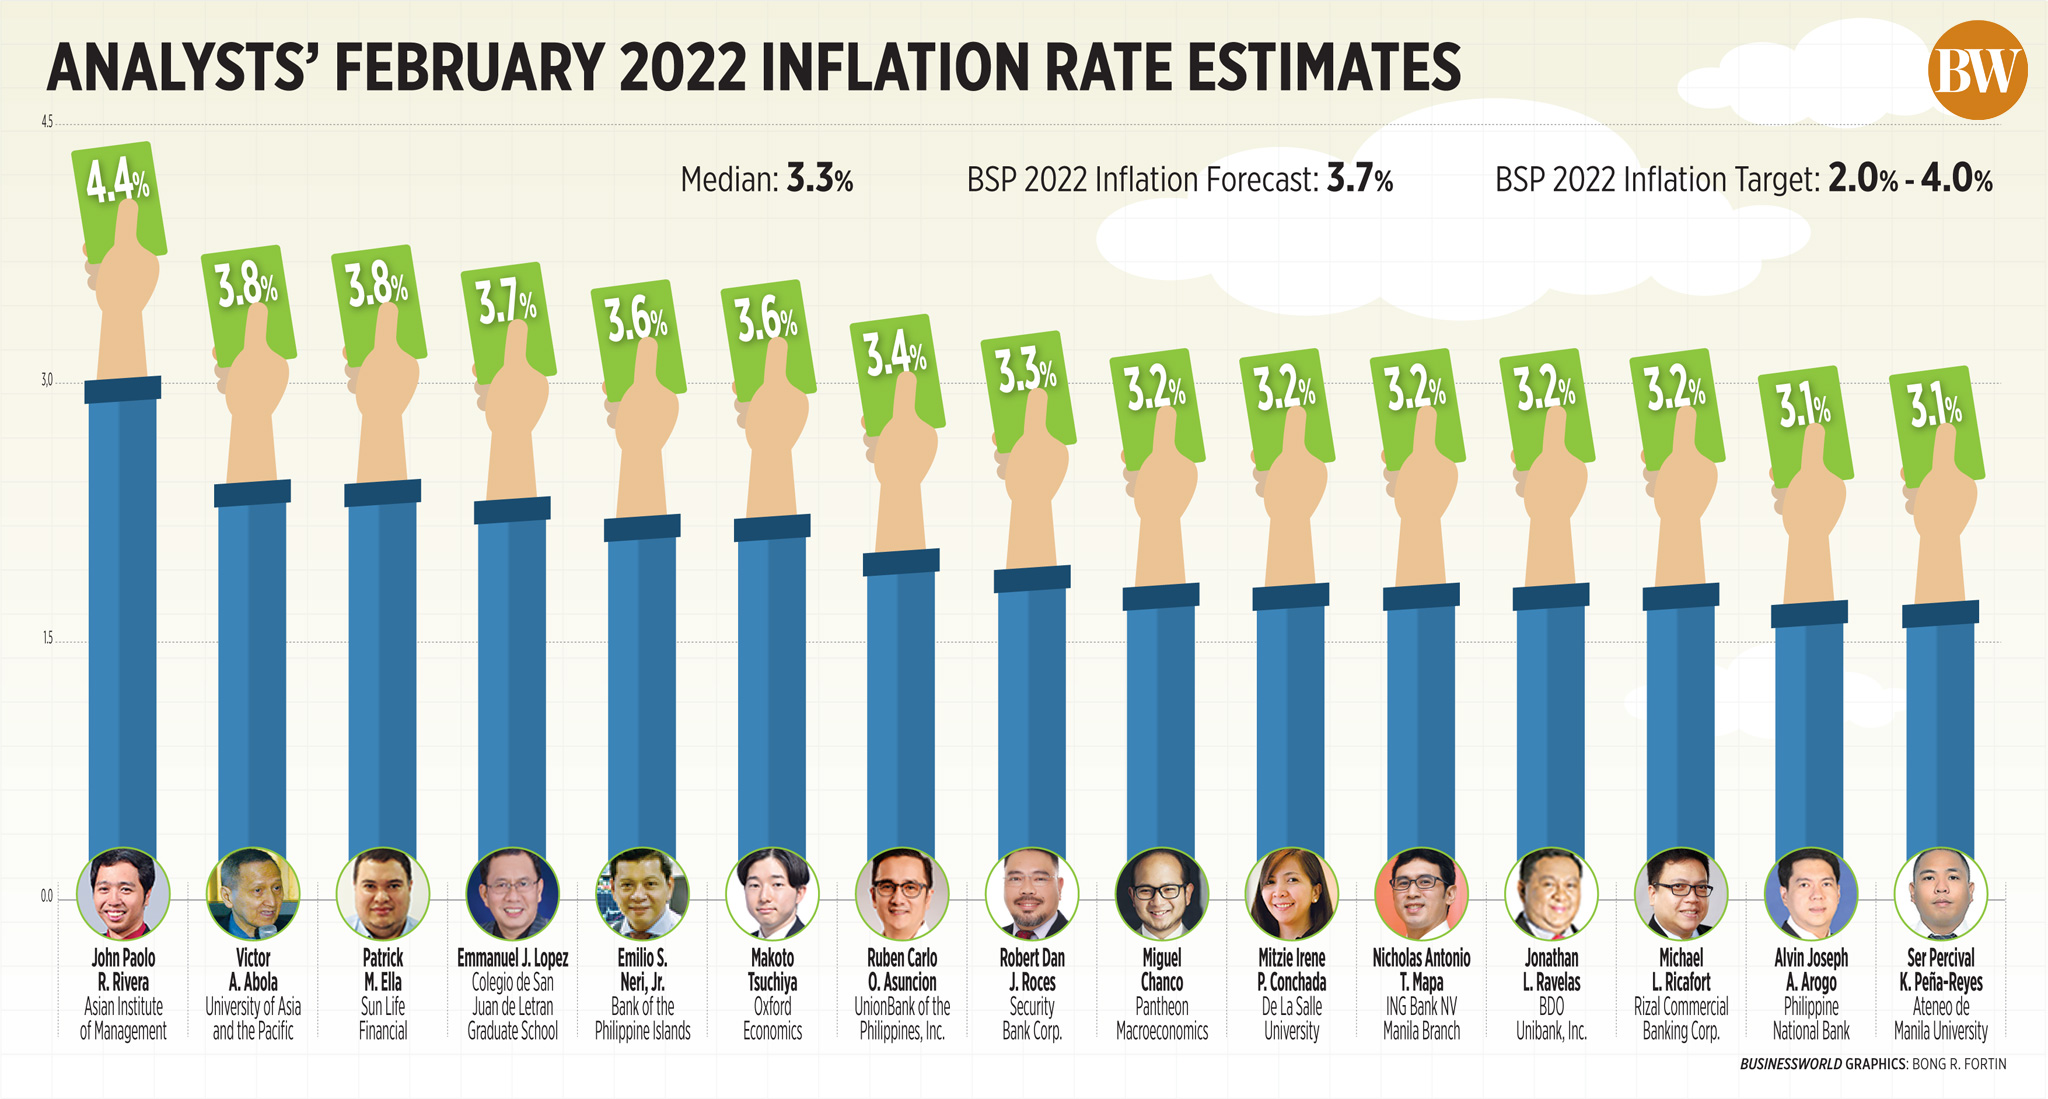 Analysts’ February 2022 inflation rate estimates